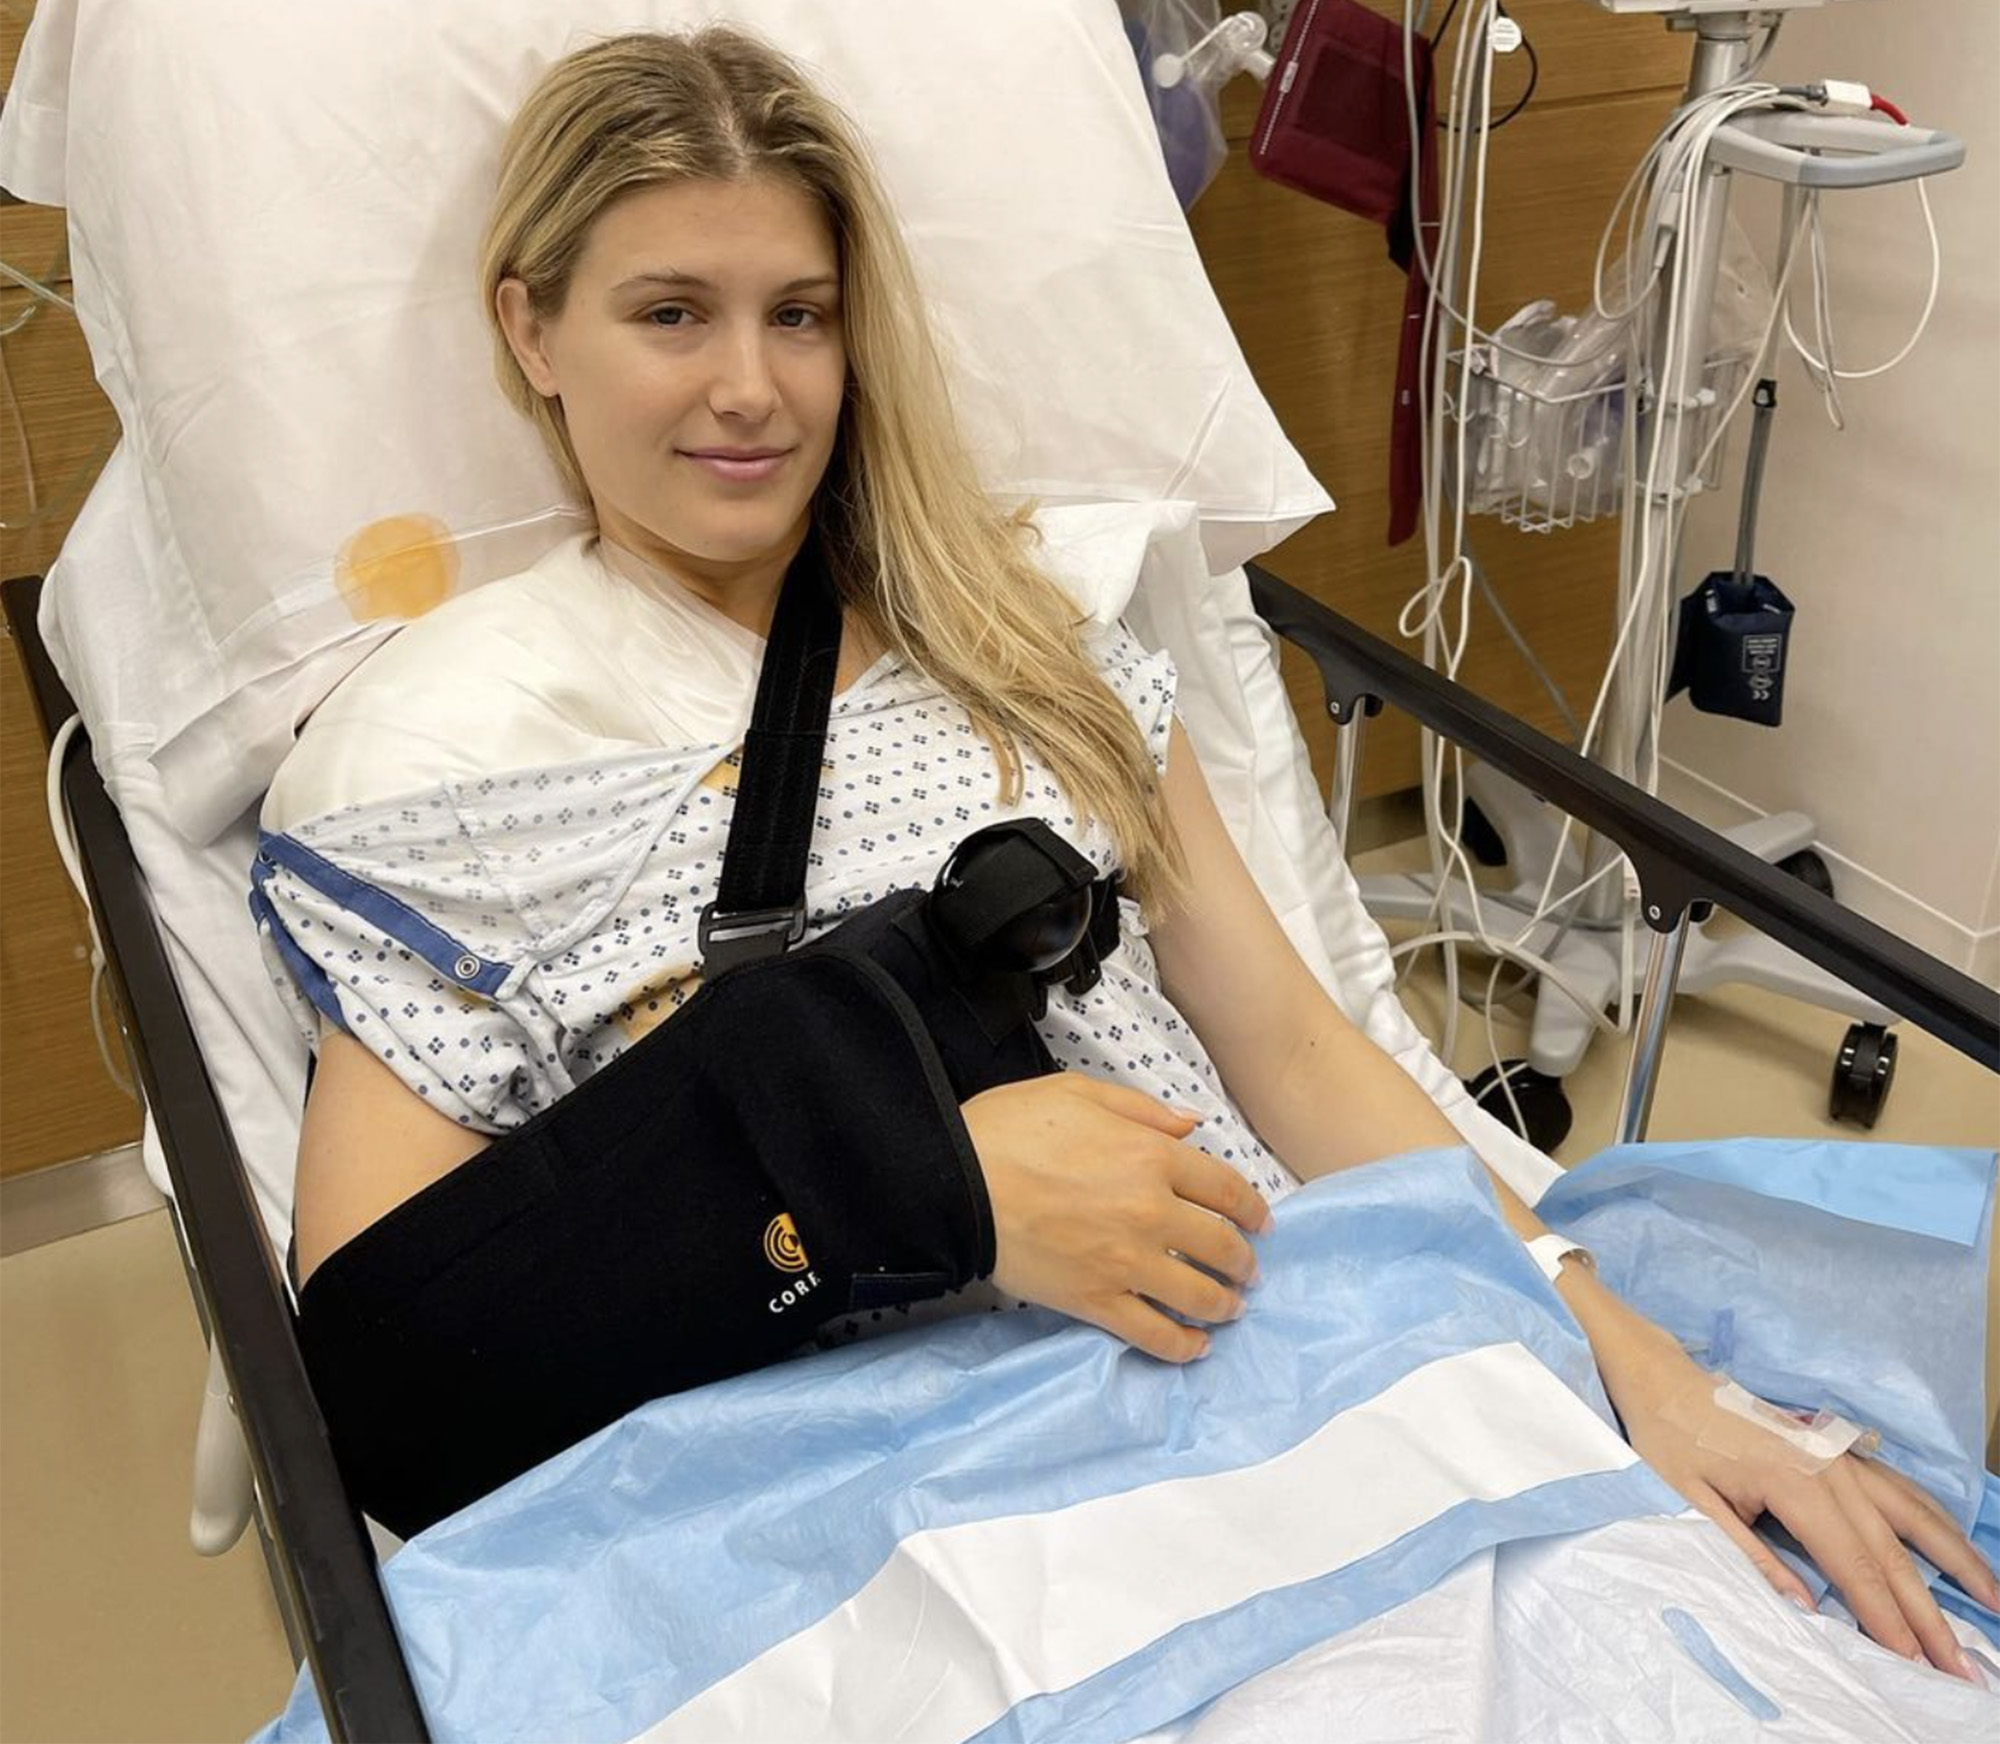 Canadian tennis player Eugenie Bouchard recently opened up about recovering from shoulder surgery.